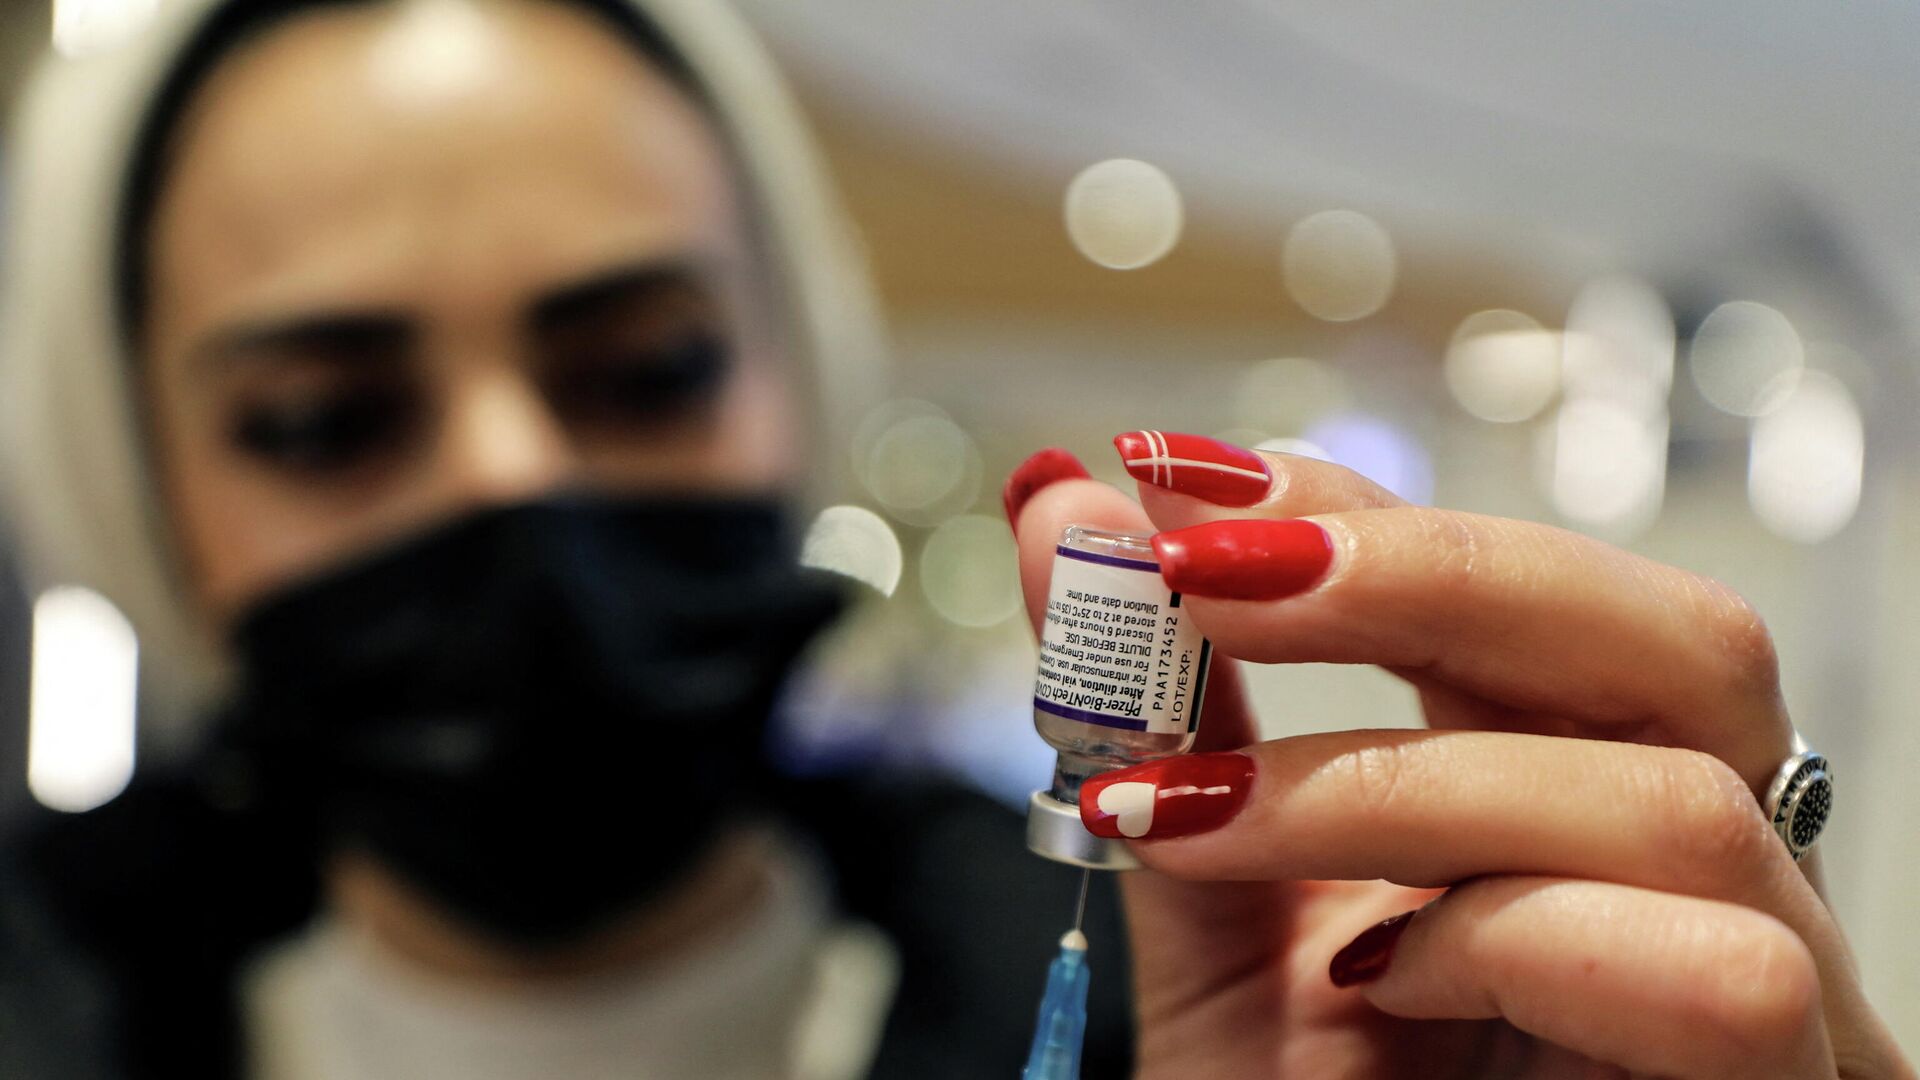 A health worker prepares a dose of Pfizer-BioNTech's coronavirus disease (COVID-19) vaccine as the COVID-19 vaccination campaign continues amid talks of a fourth dose for high-risk groups including those over the age of 60, in Malcha shopping mall, Jerusalem, December 22, 2021 - Sputnik International, 1920, 19.01.2022